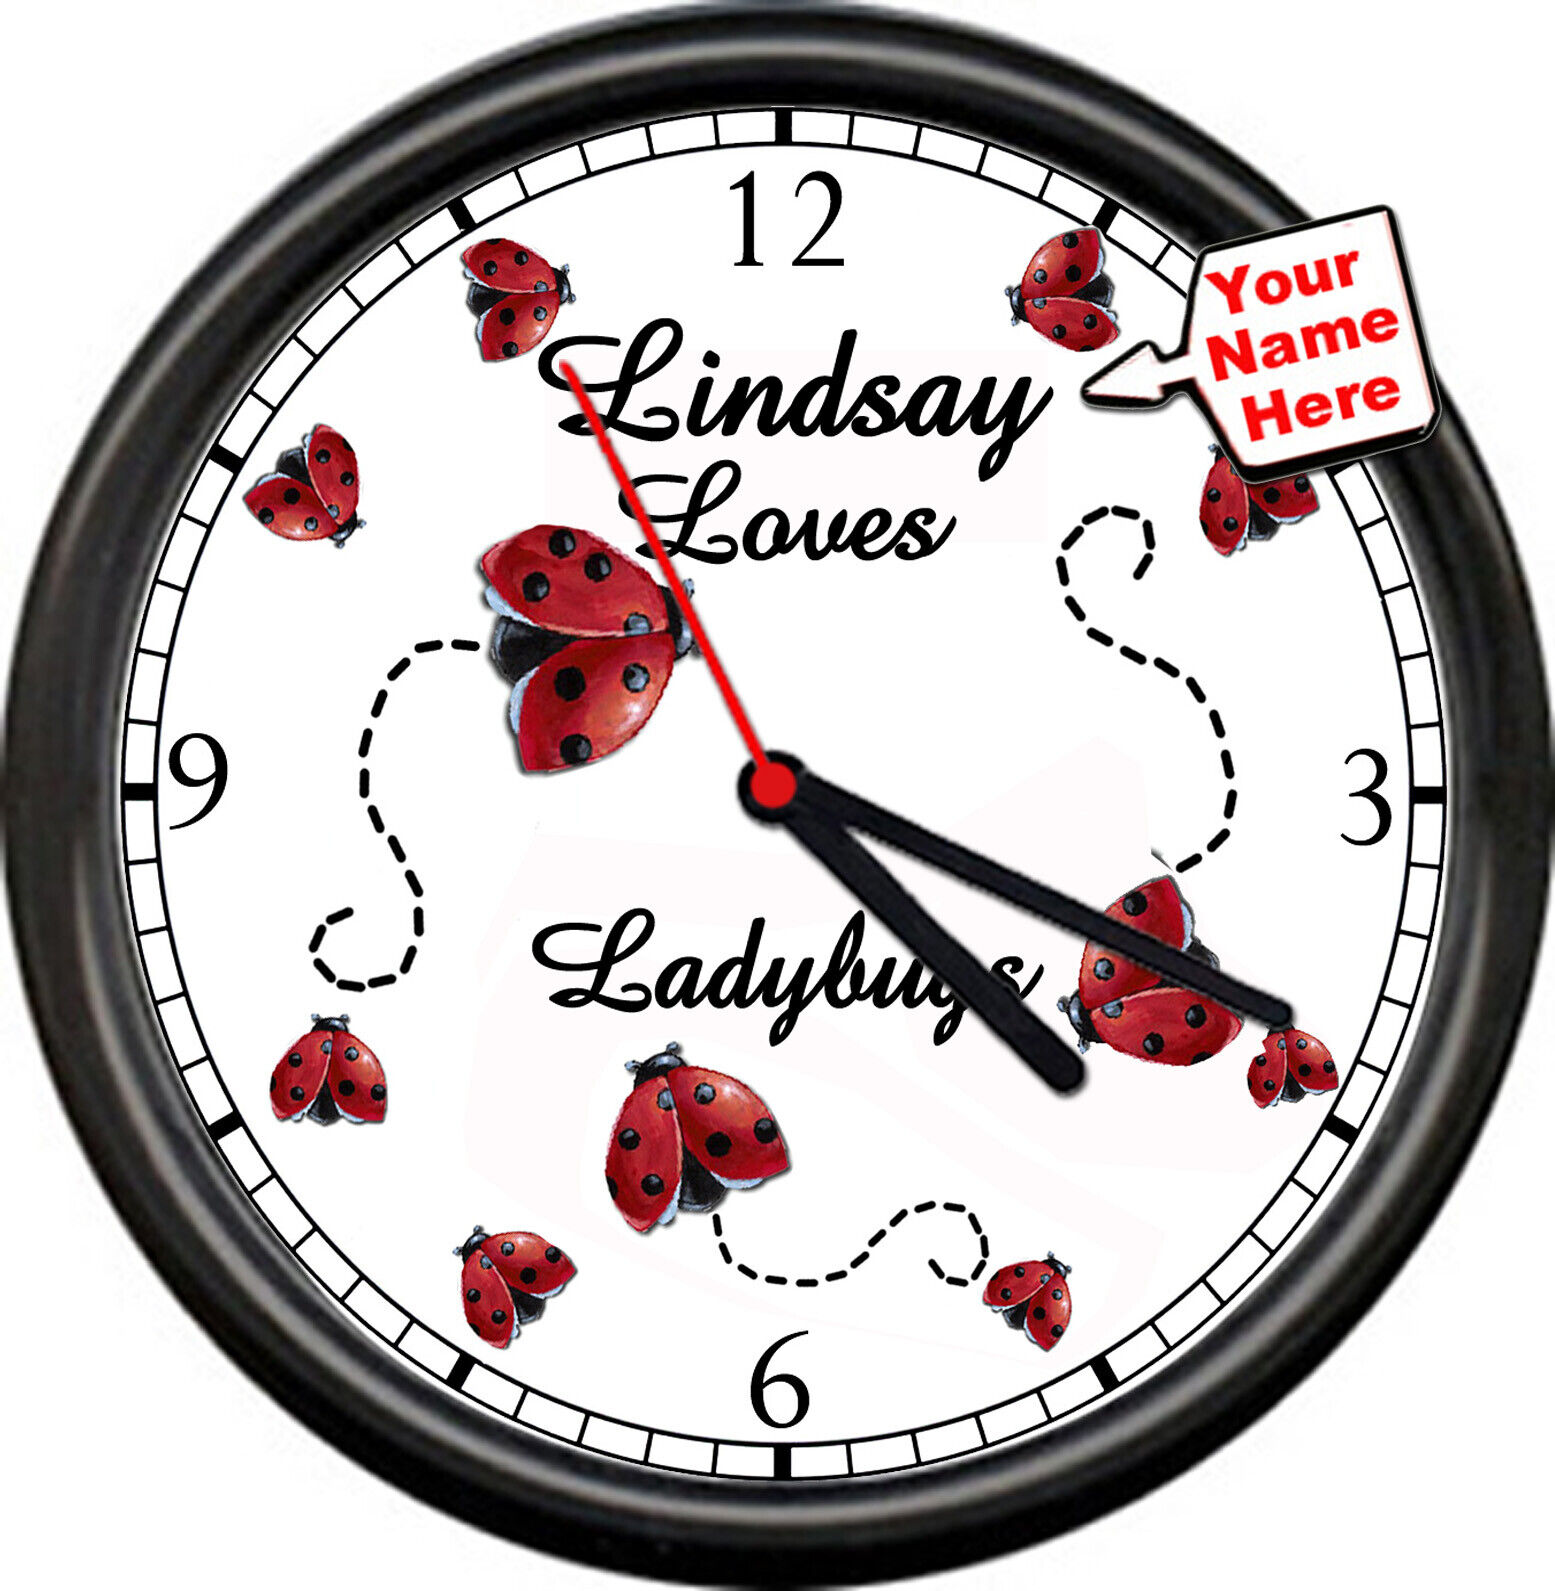 Lady Bug Ladybug Bug Personalized Your Name Summer Insect Garden Sign Wall Clock